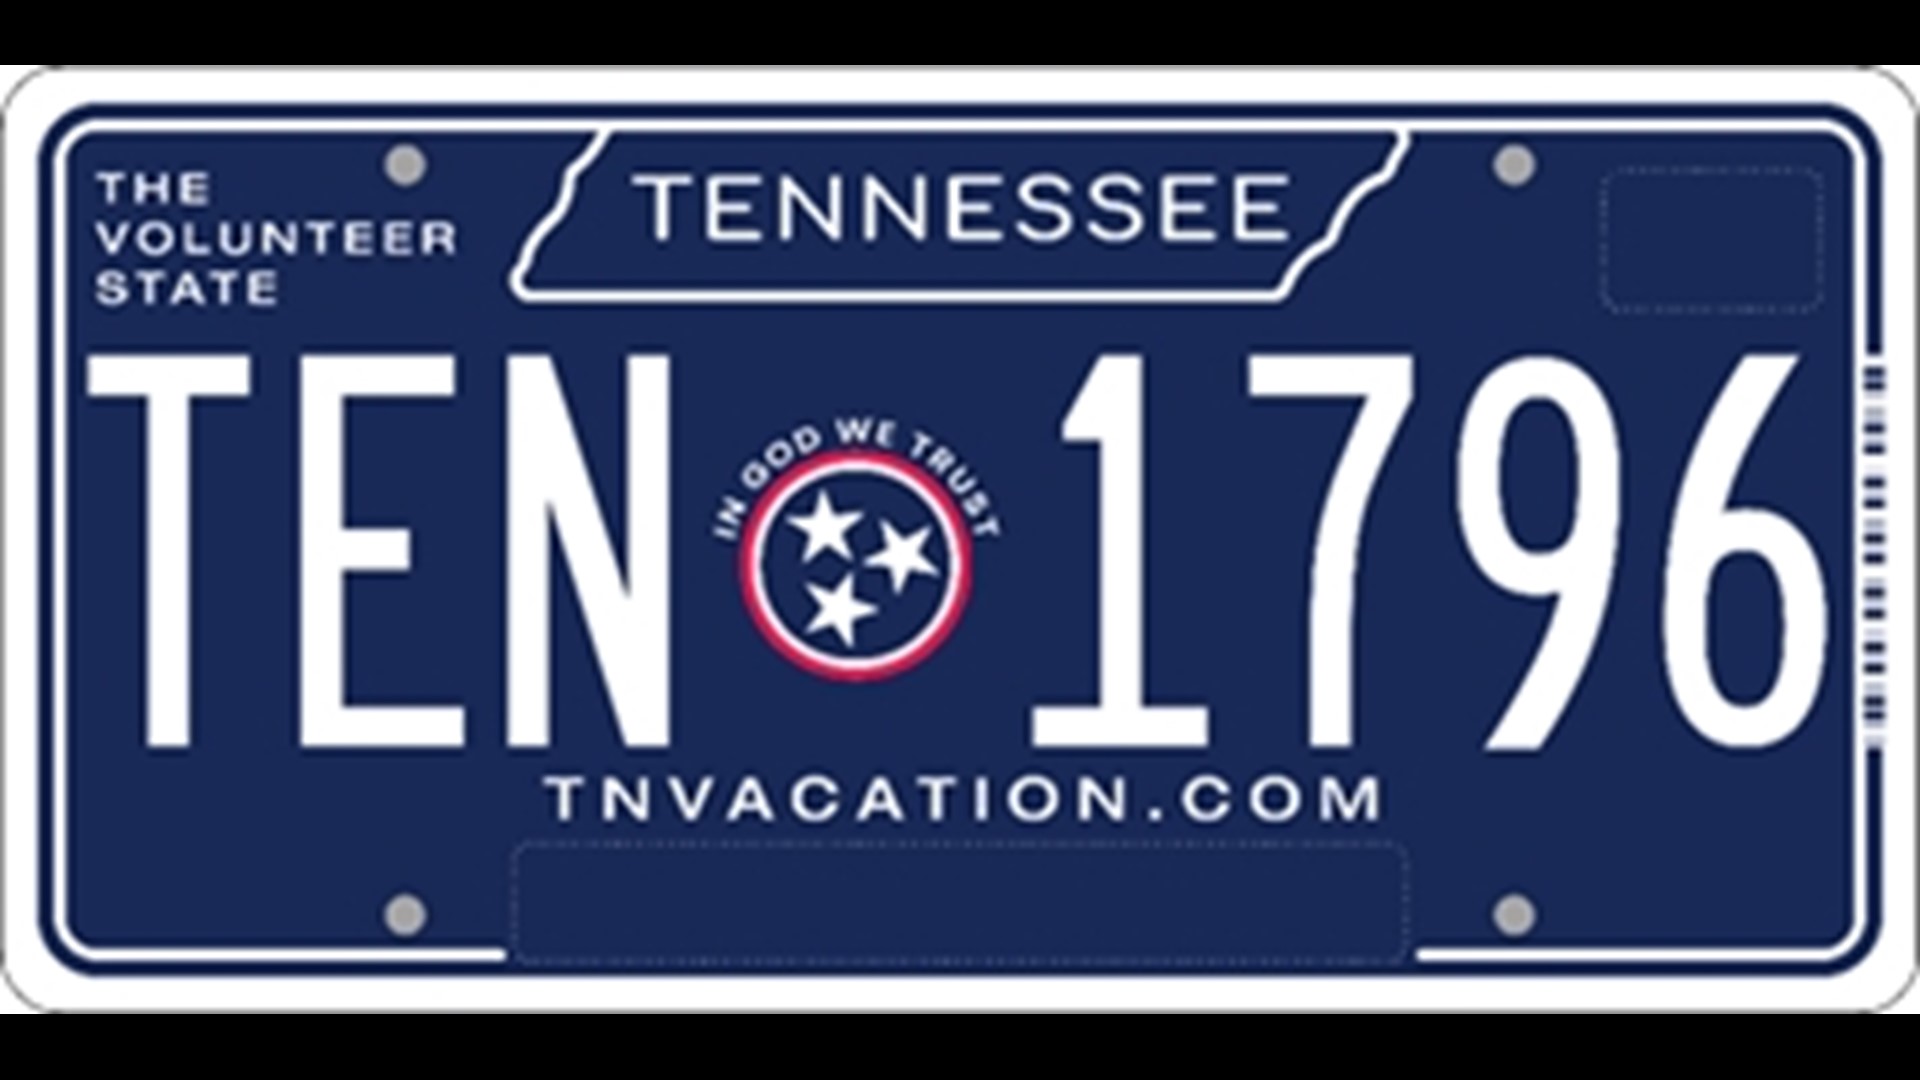 Tennessee drivers will get new license plates starting in 2022.